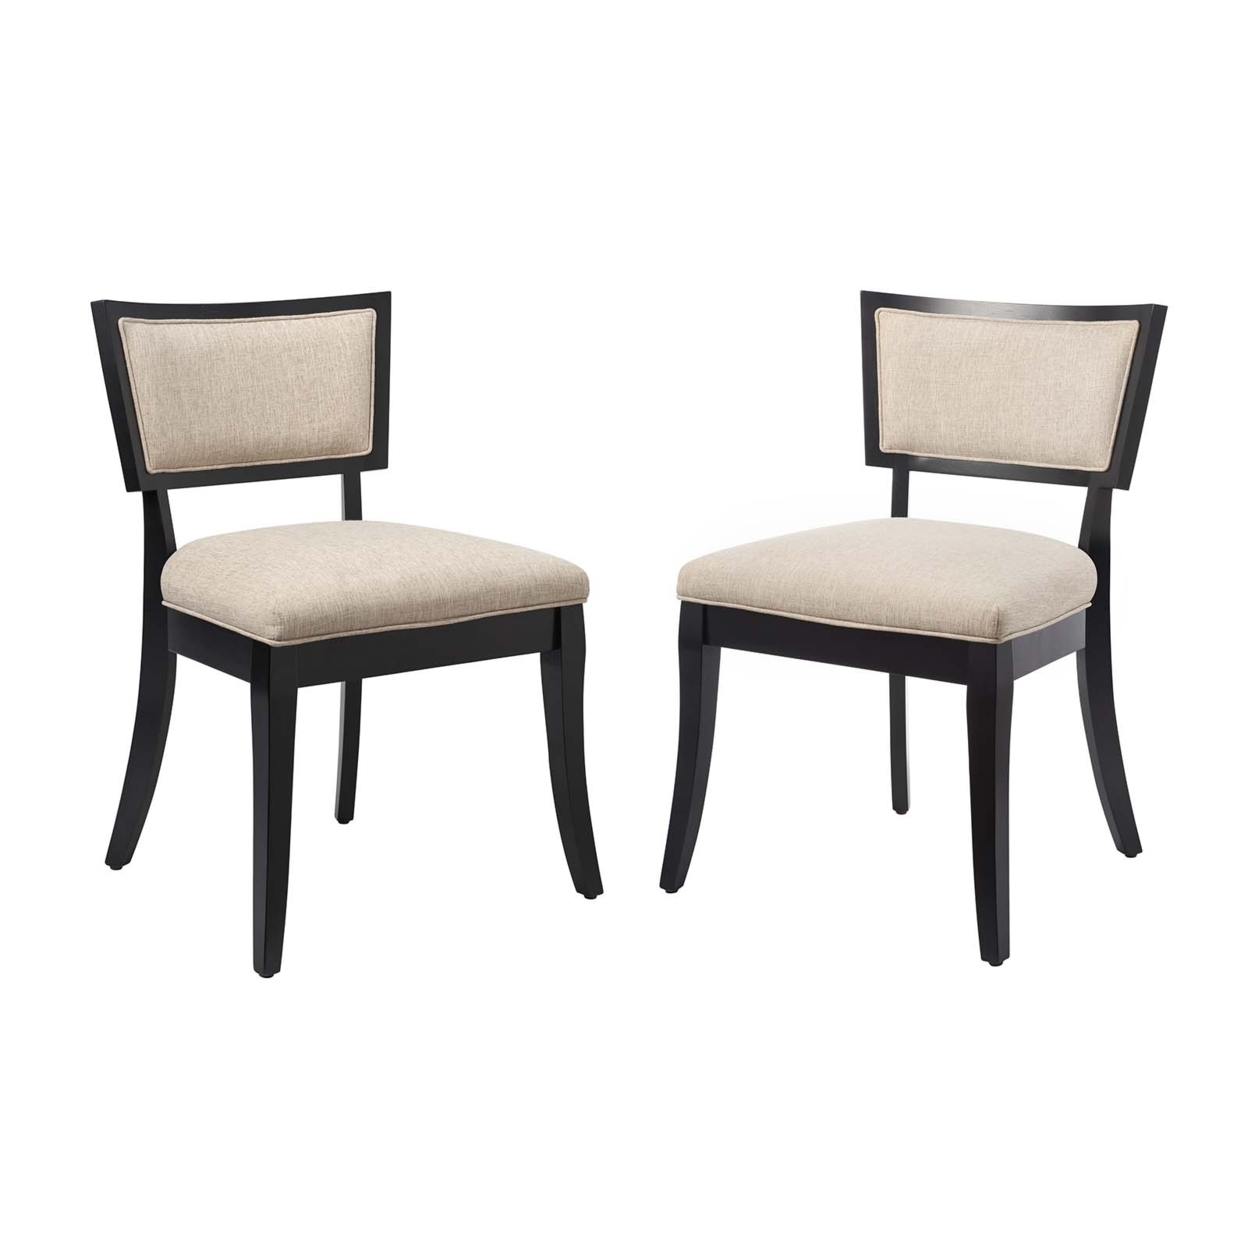 Pristine Upholstered Fabric Dining Chairs - Set Of 2, Beige